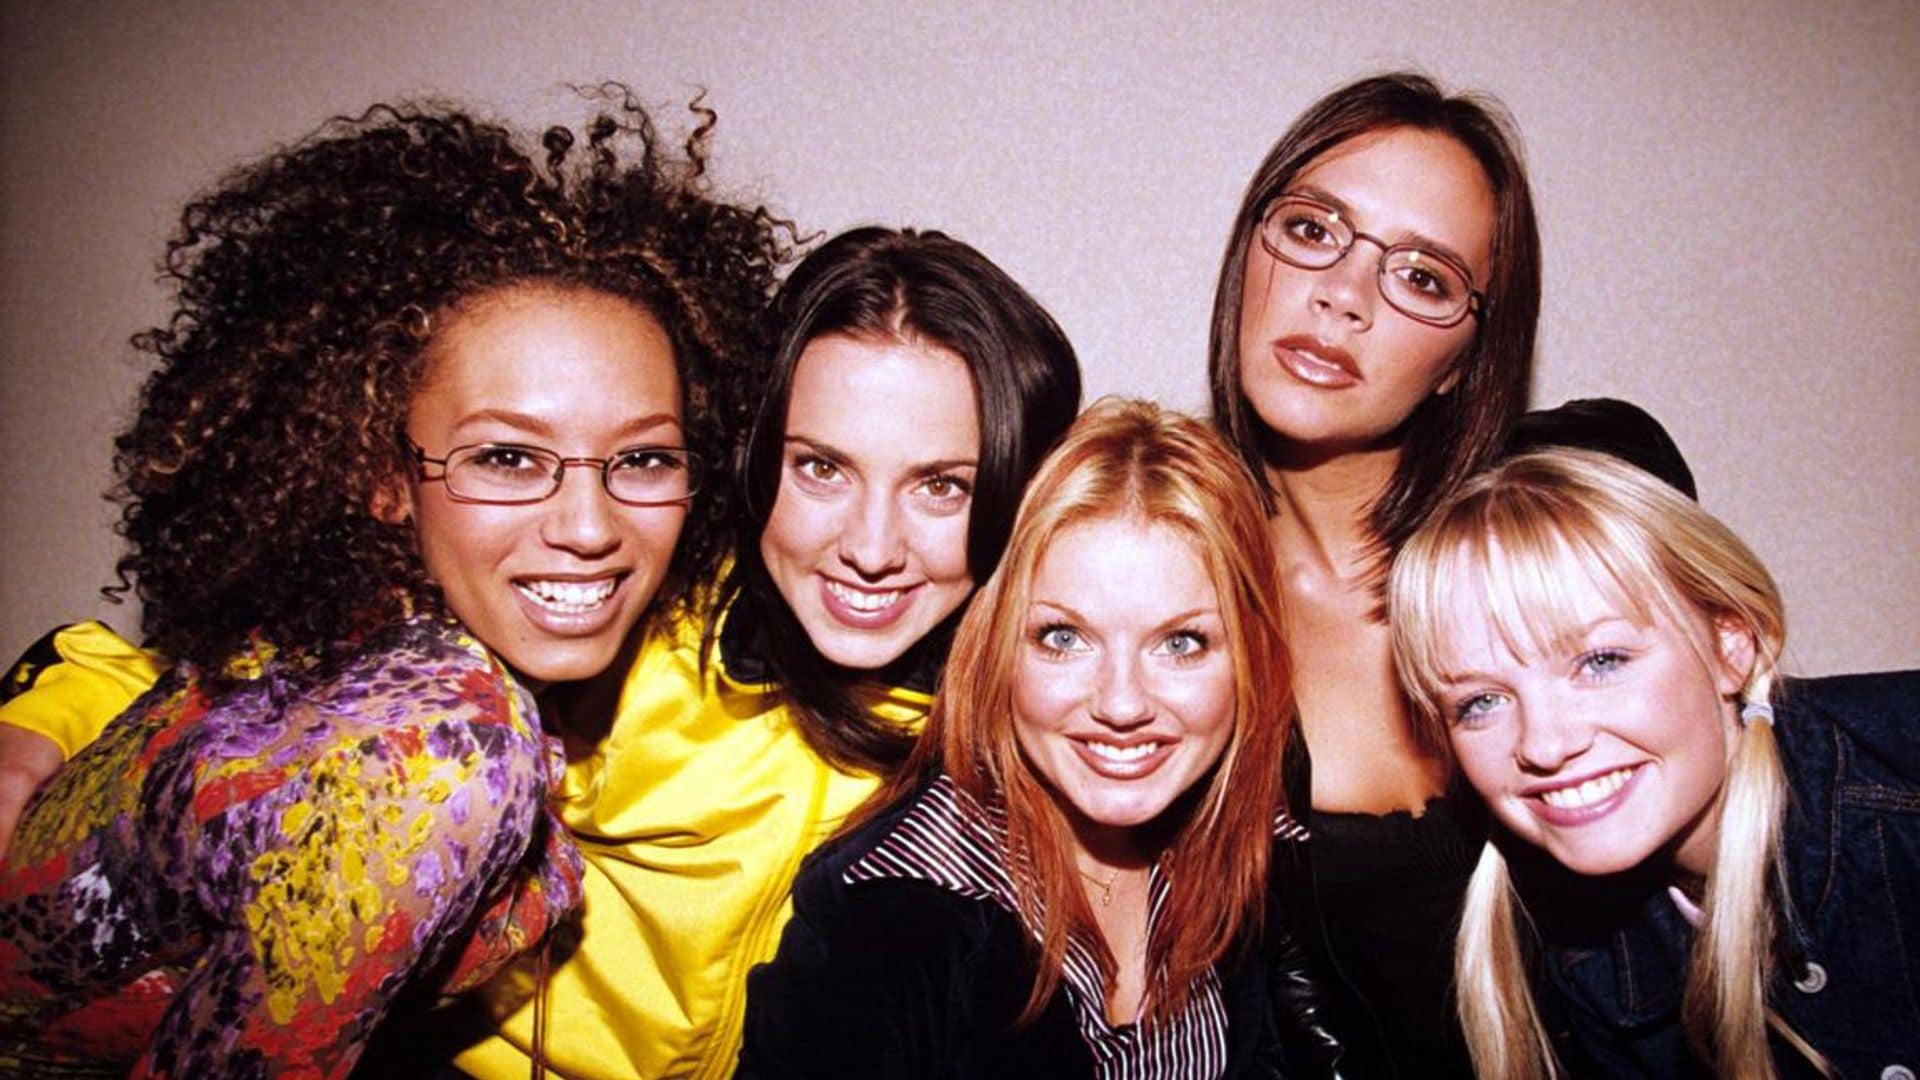 The Spice Girls are adamant about Victoria Beckham joining them for a 2021 U.S. tour